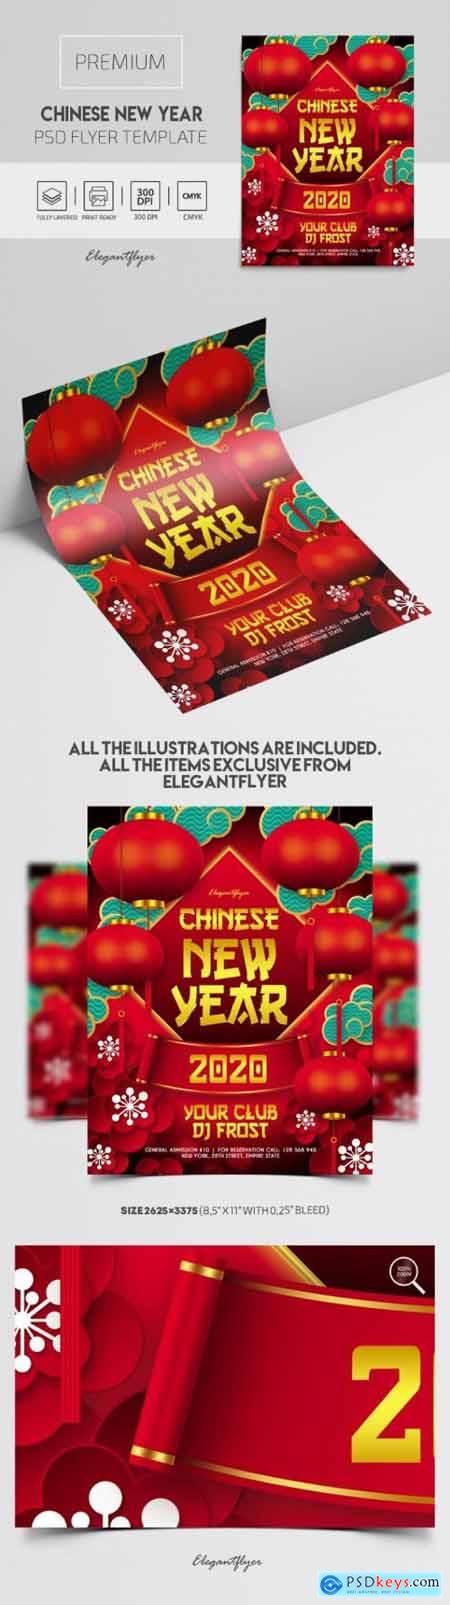 Chinese New Year  Premium PSD Flyer Template